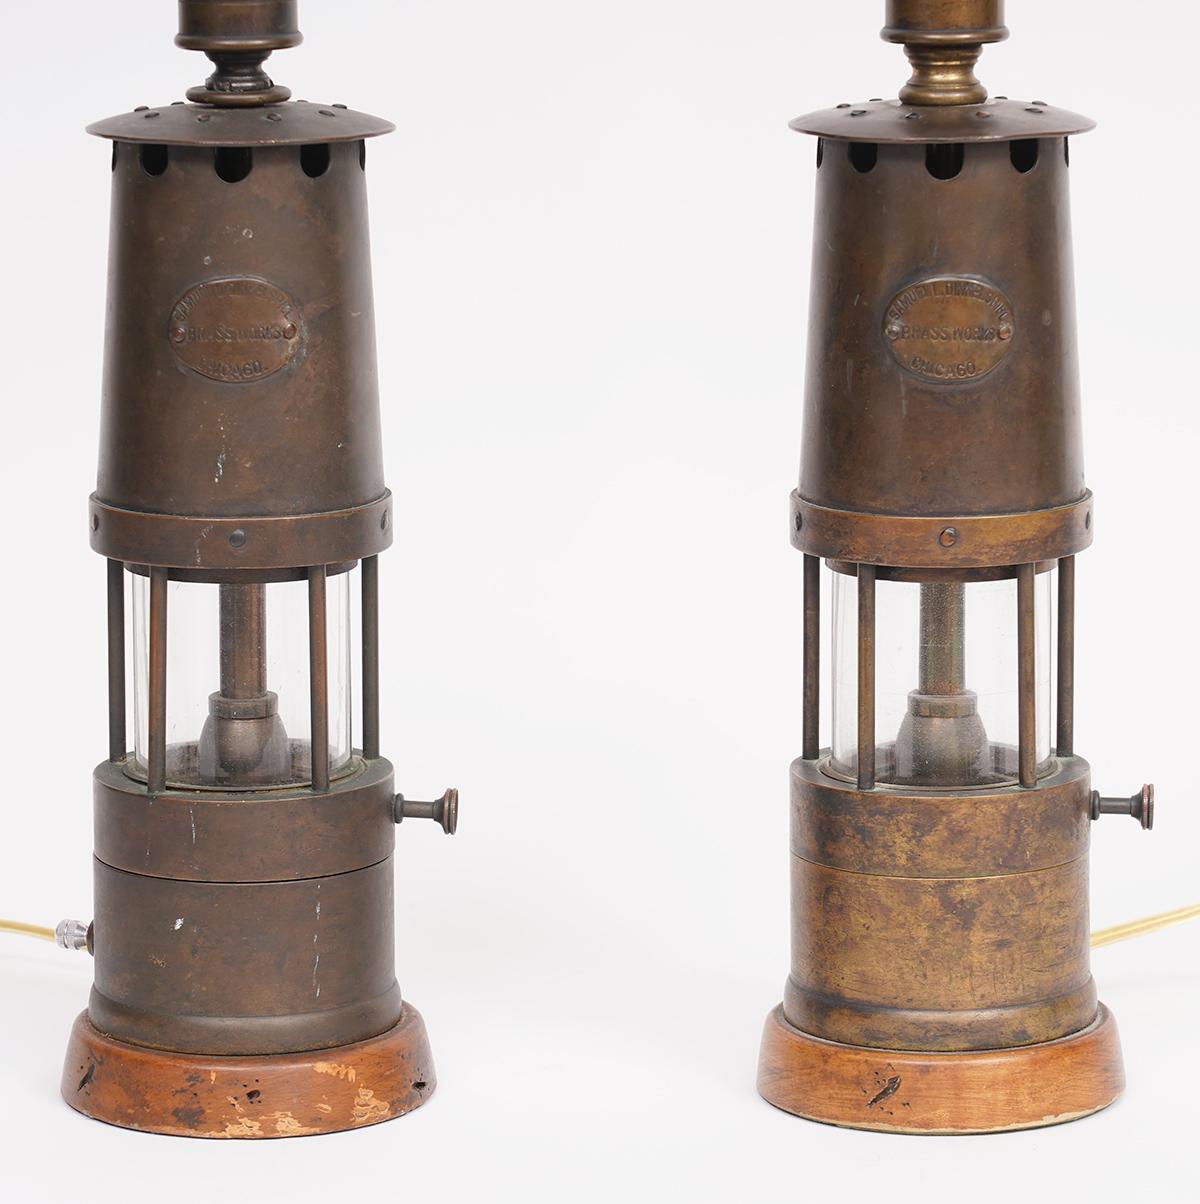 Samuel L. Dinkelspiel brass works in Chicago is known for several well crafted products including many lamps. This pair of brass and copper miner's lanterns have been converted into table lamps with wood bases and a top stems holding sockets and